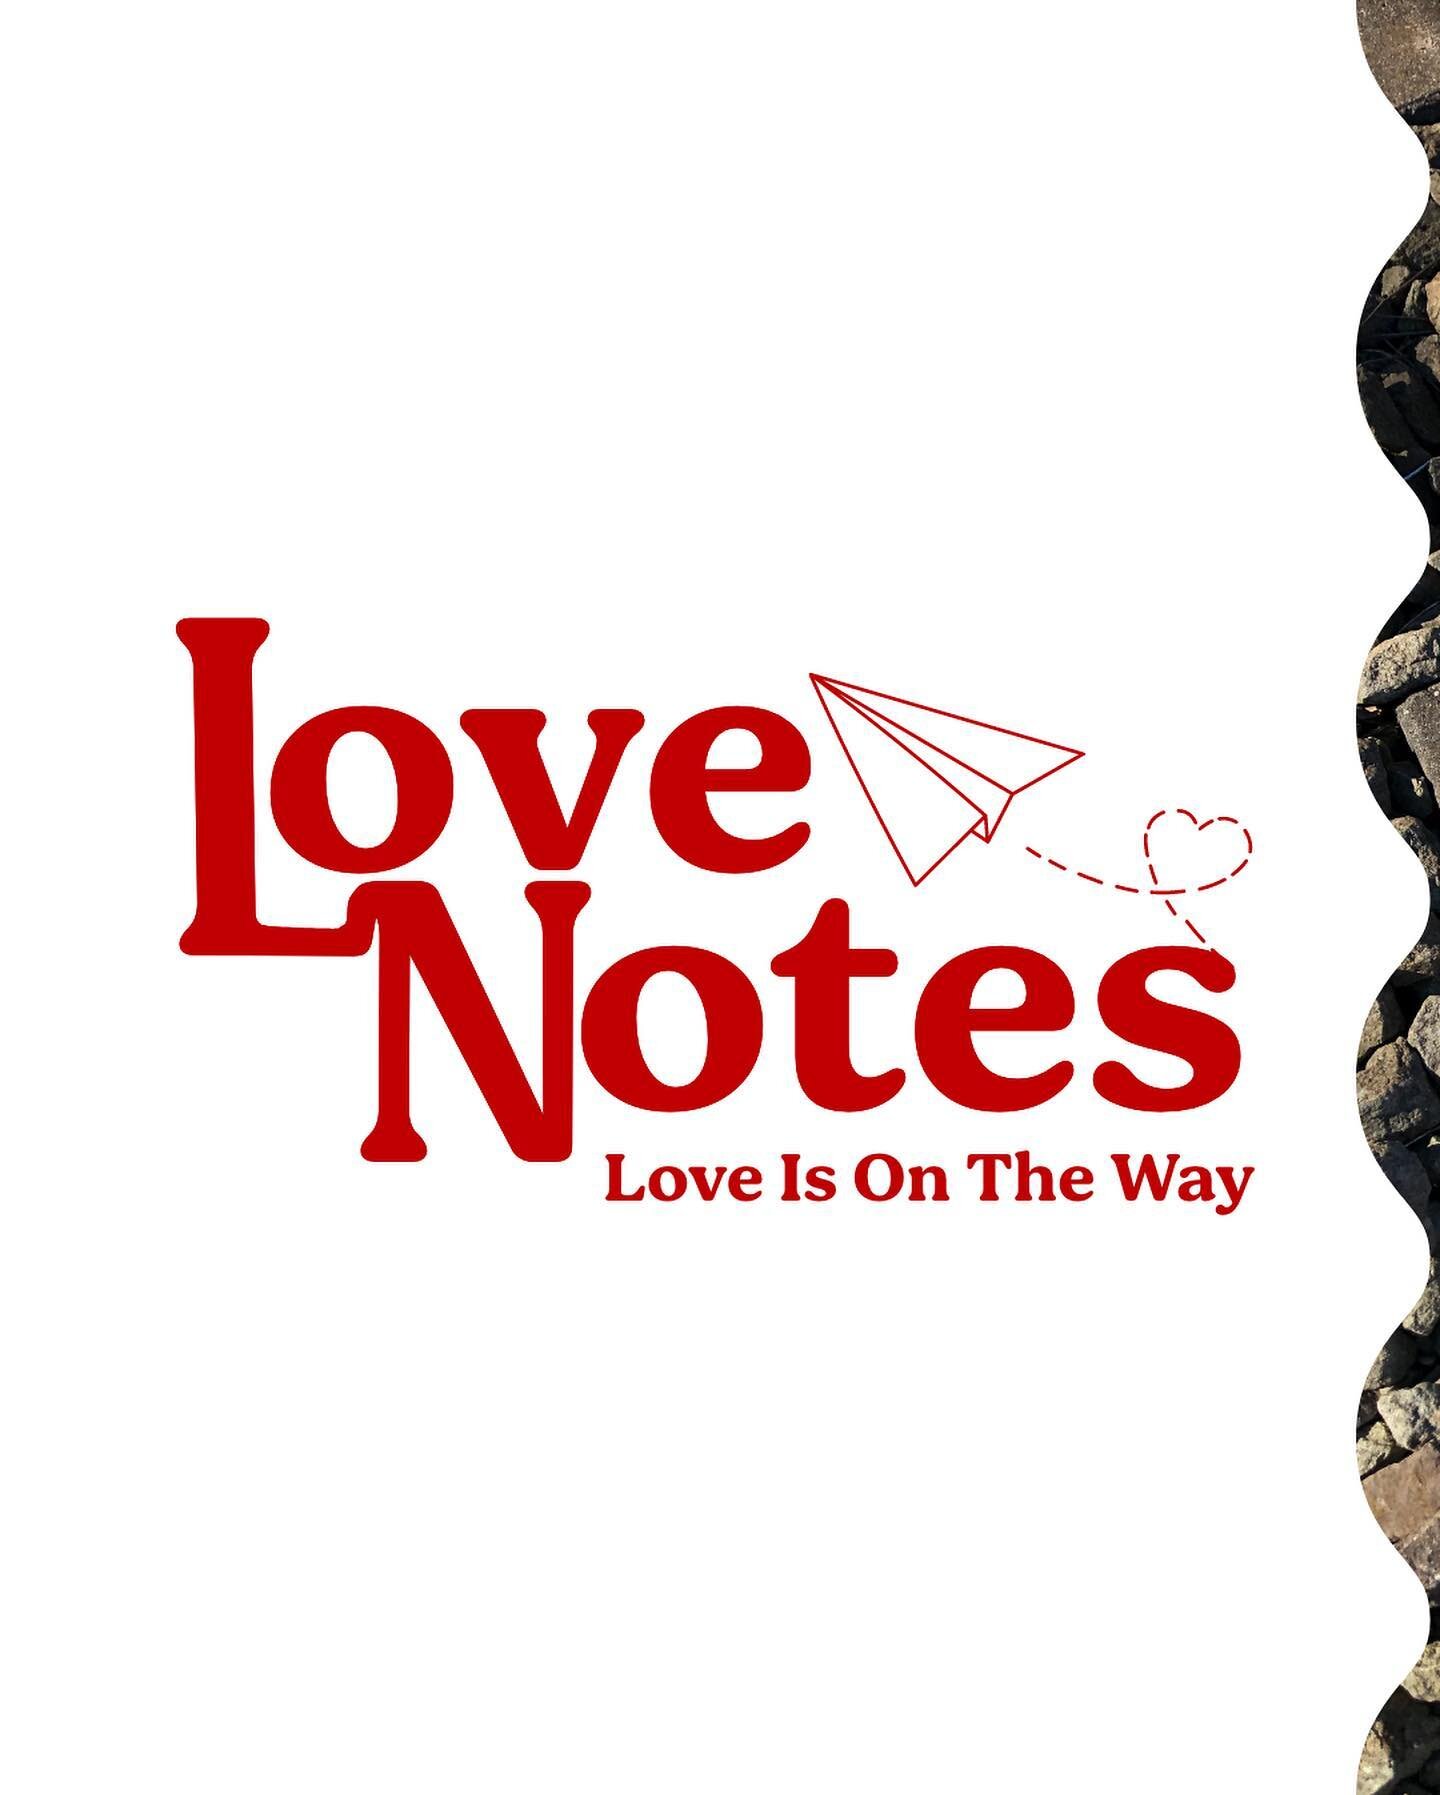 Introducing: Love Notes 💌 A stationary gift company for your loved ones any time of the year! ❤️&zwj;🔥

Services Provided:
Mini Brand + Logo Suite
Thank You Card Design
Packaging Design
Poster Advertising Sign
Promo Card

#thesevenagency #the7agenc